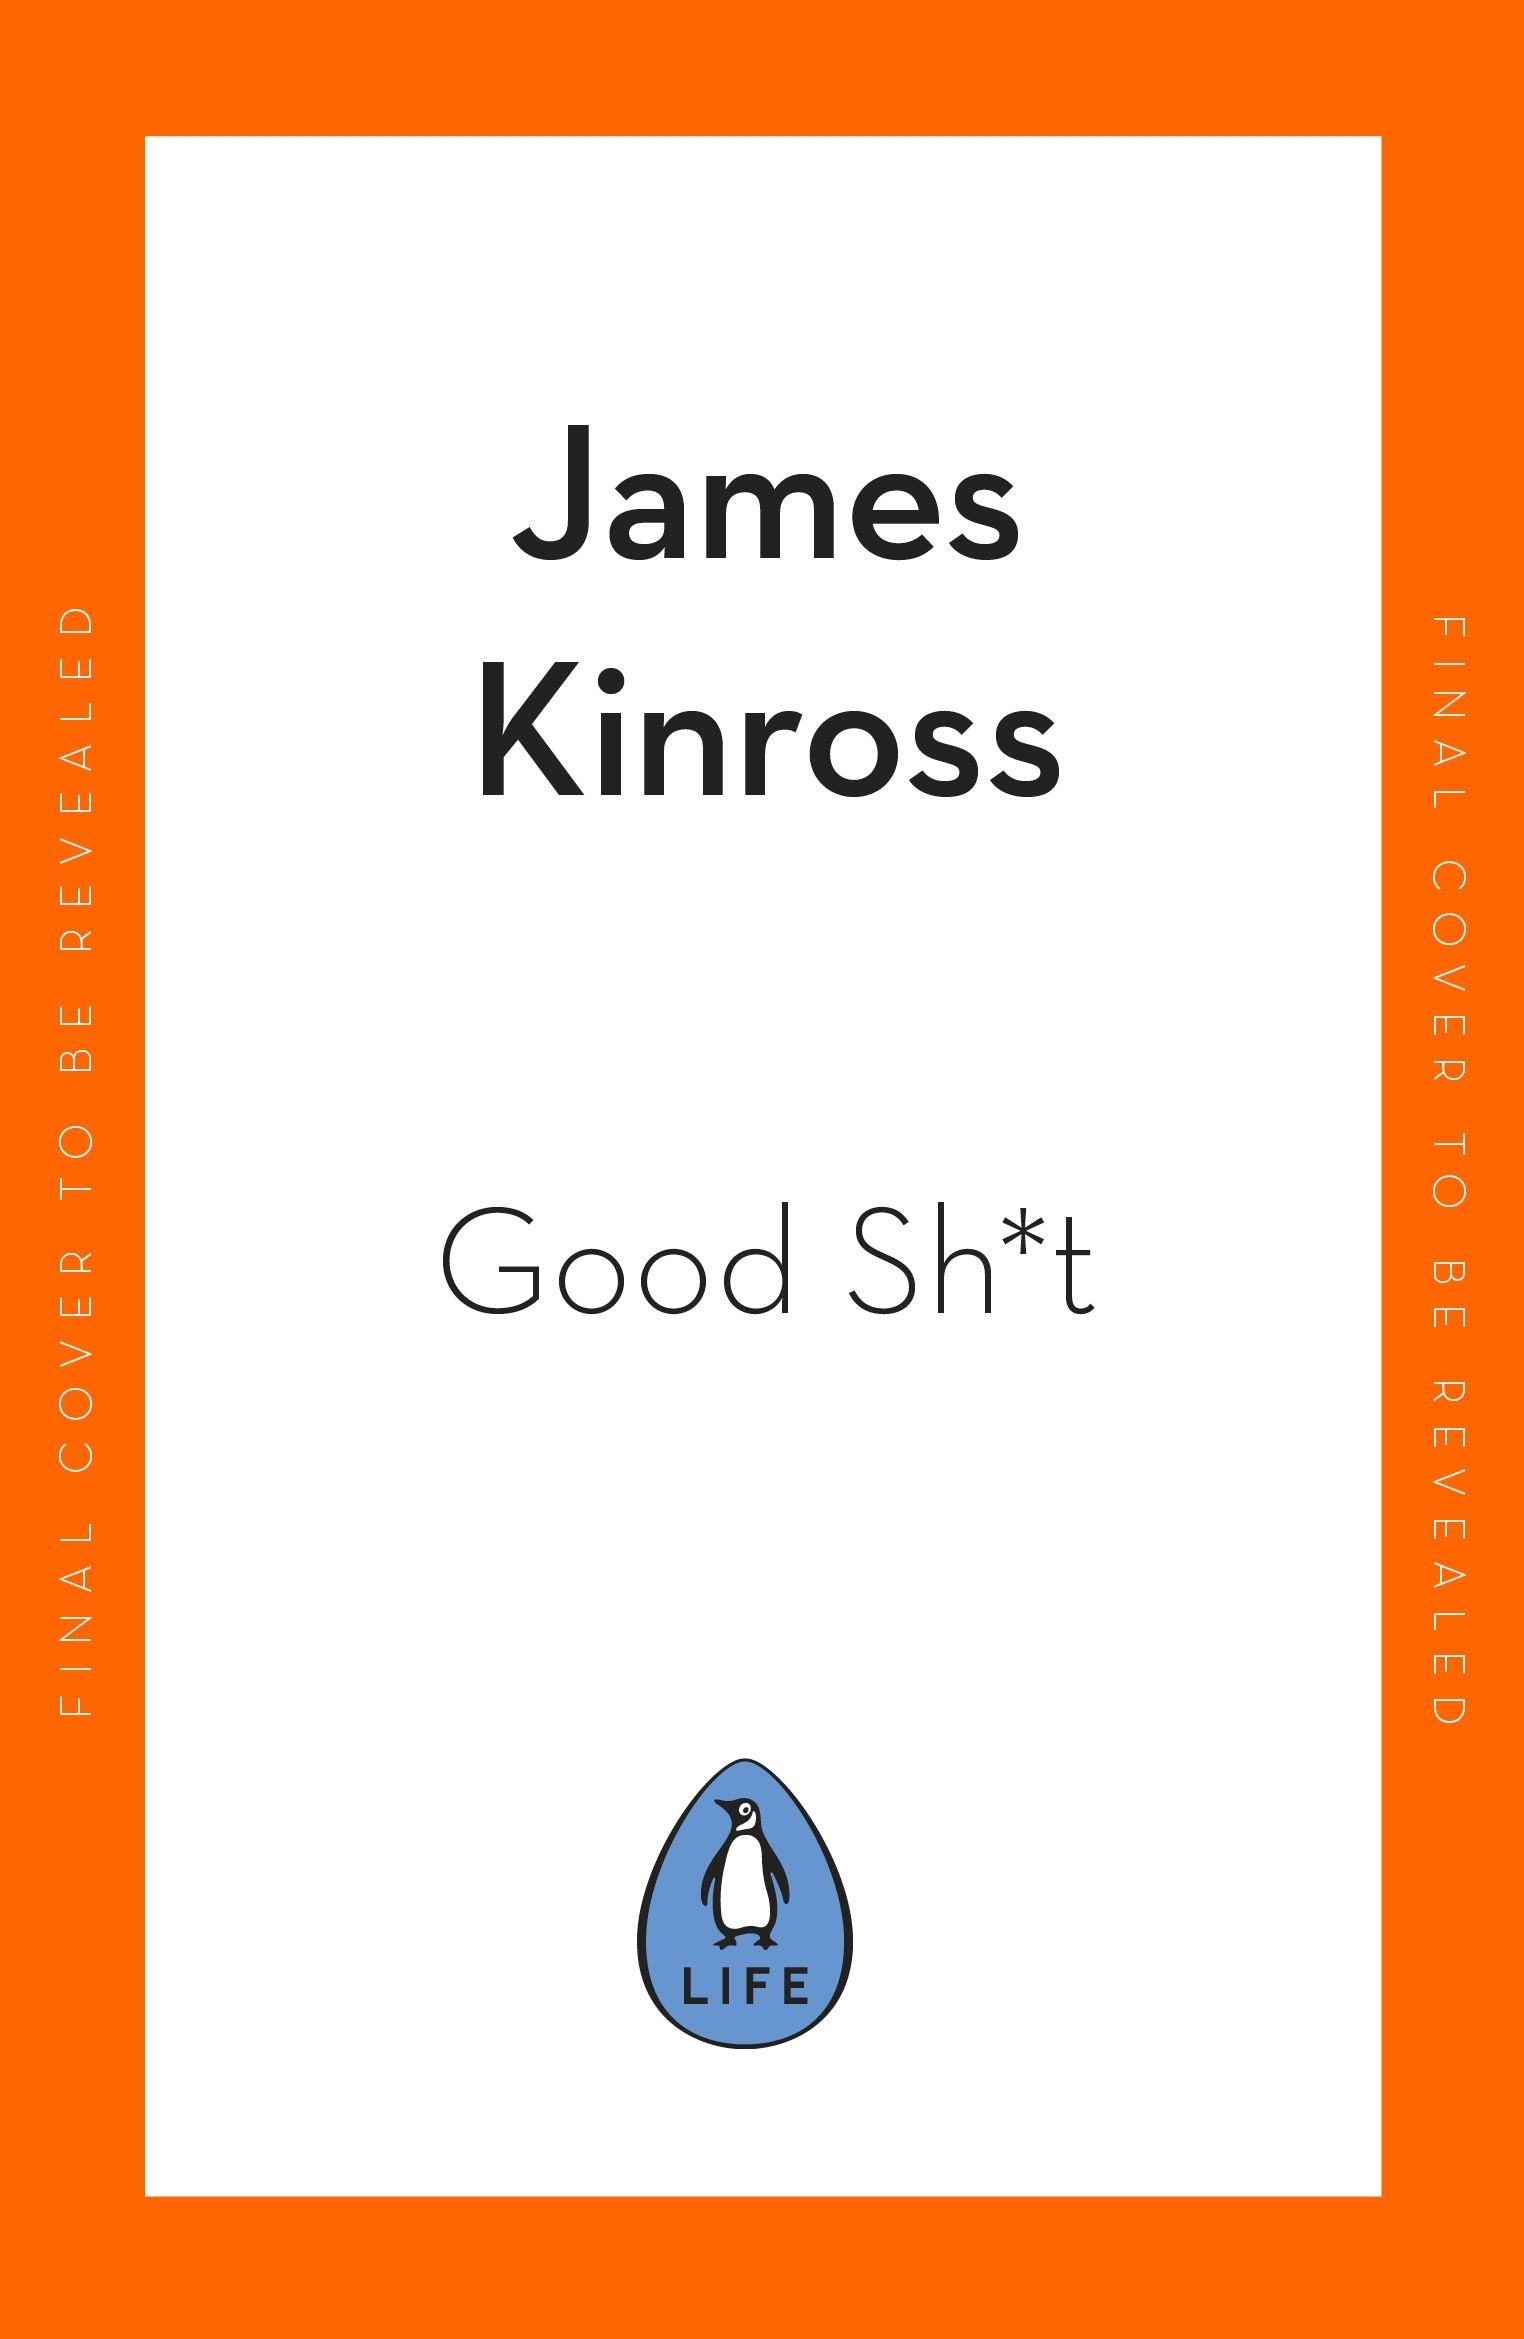 Book “Good Sh*t” by James Kinross — May 4, 2023